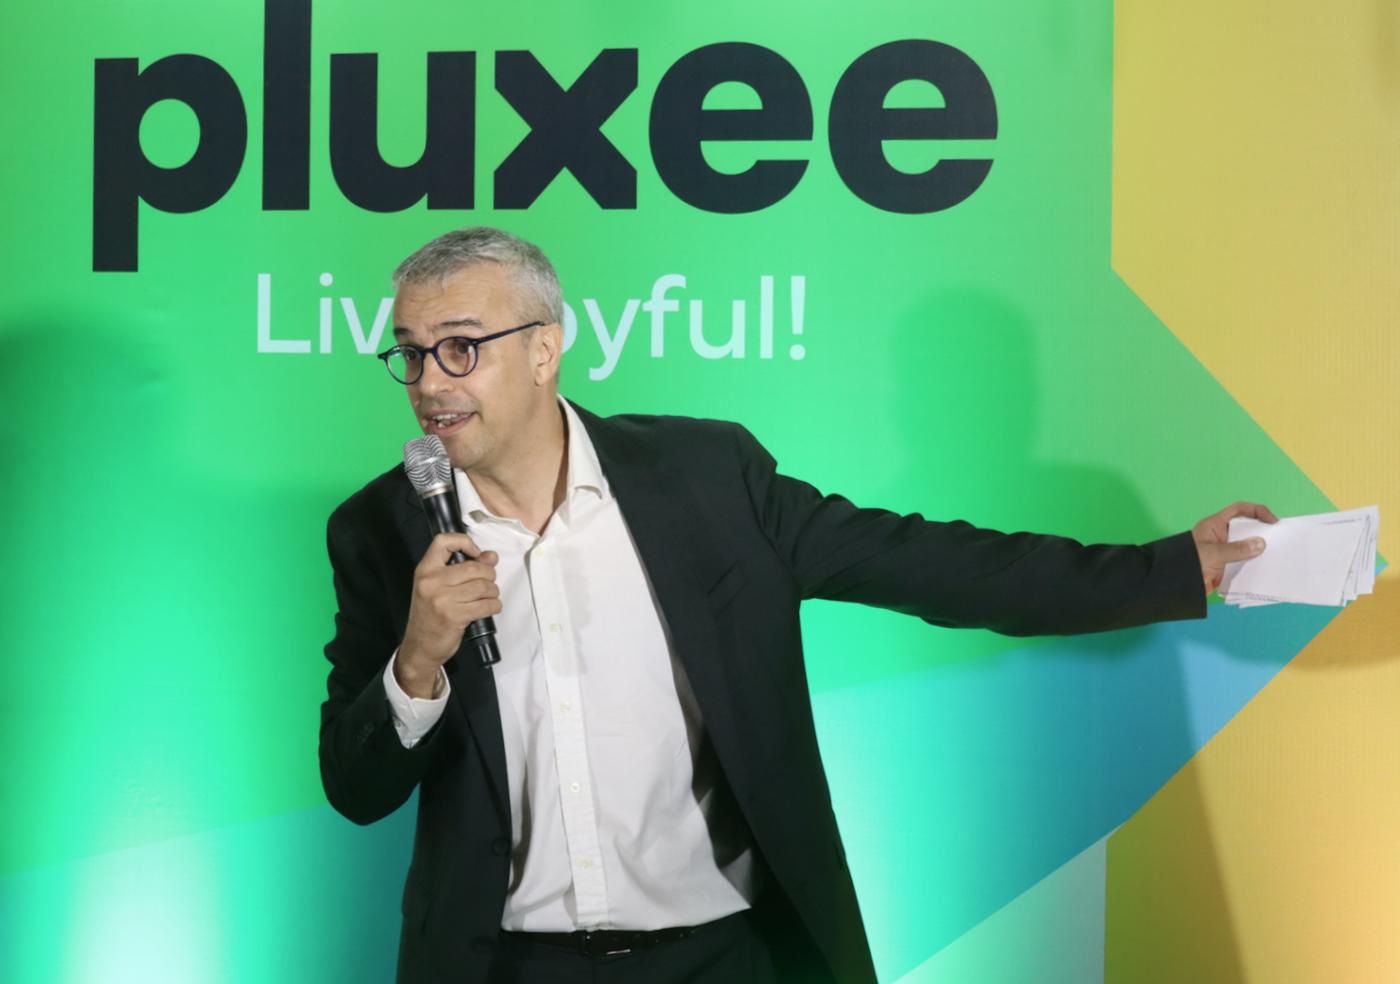 Pluxee is here, your new Global partner in employee benefits and engagement